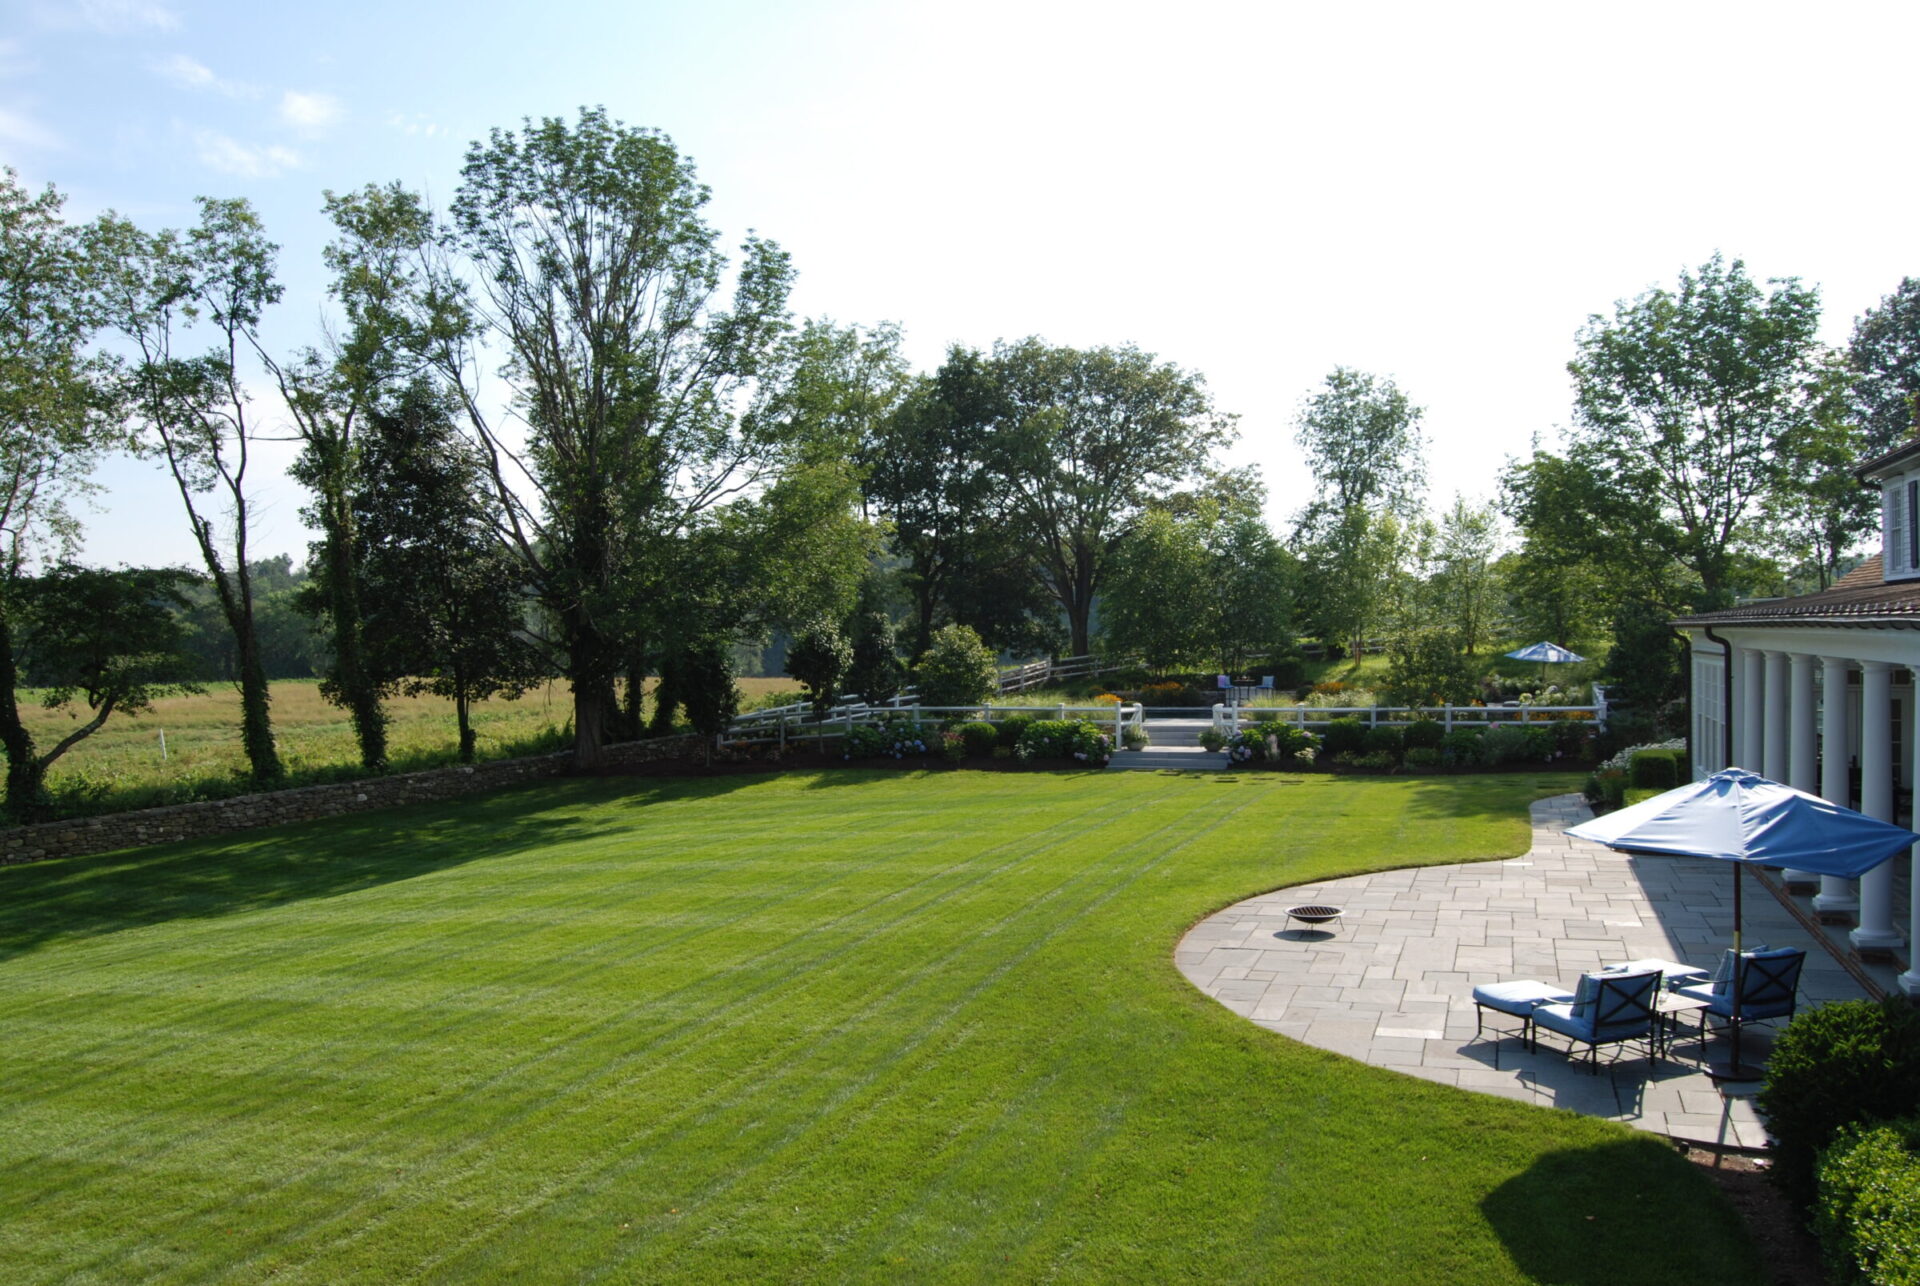 The image shows a neatly manicured lawn with striped patterns, a patio area with seating, an umbrella, and a lush landscape with trees under a clear sky.